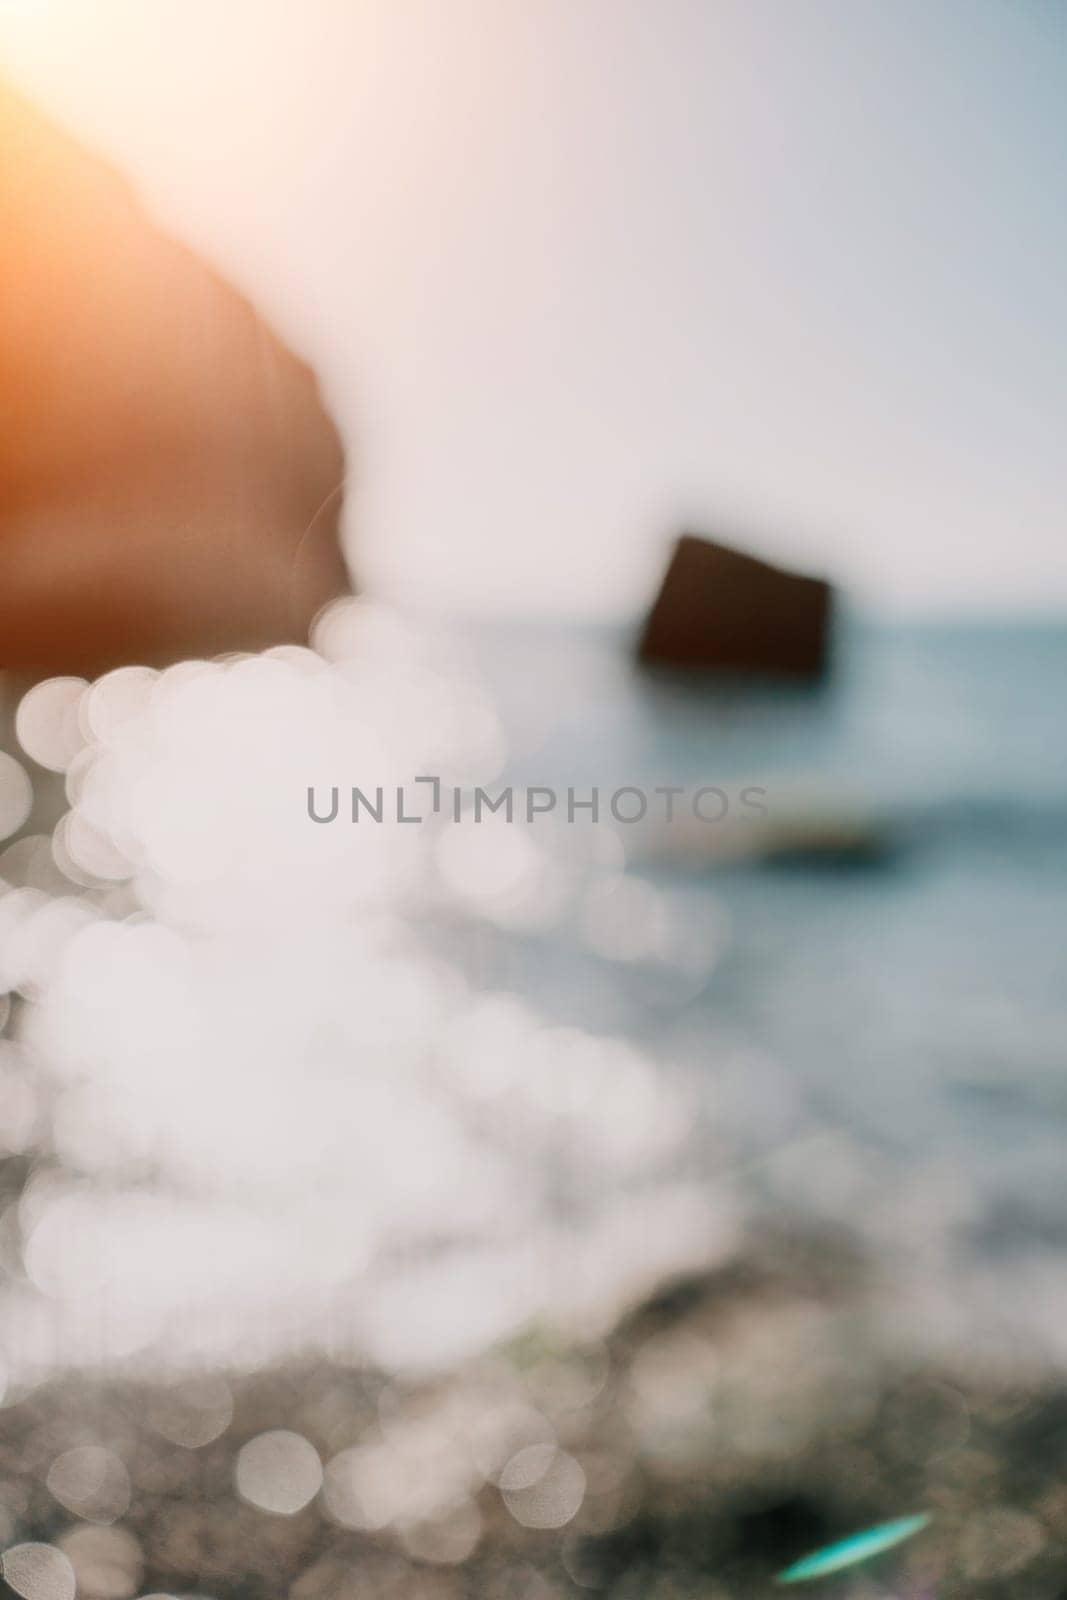 Abstract sea summer ocean sunset nature background. Small waves on golden water surface in motion blur with golden bokeh lights from sun. Holiday, vacation and recreational concept.